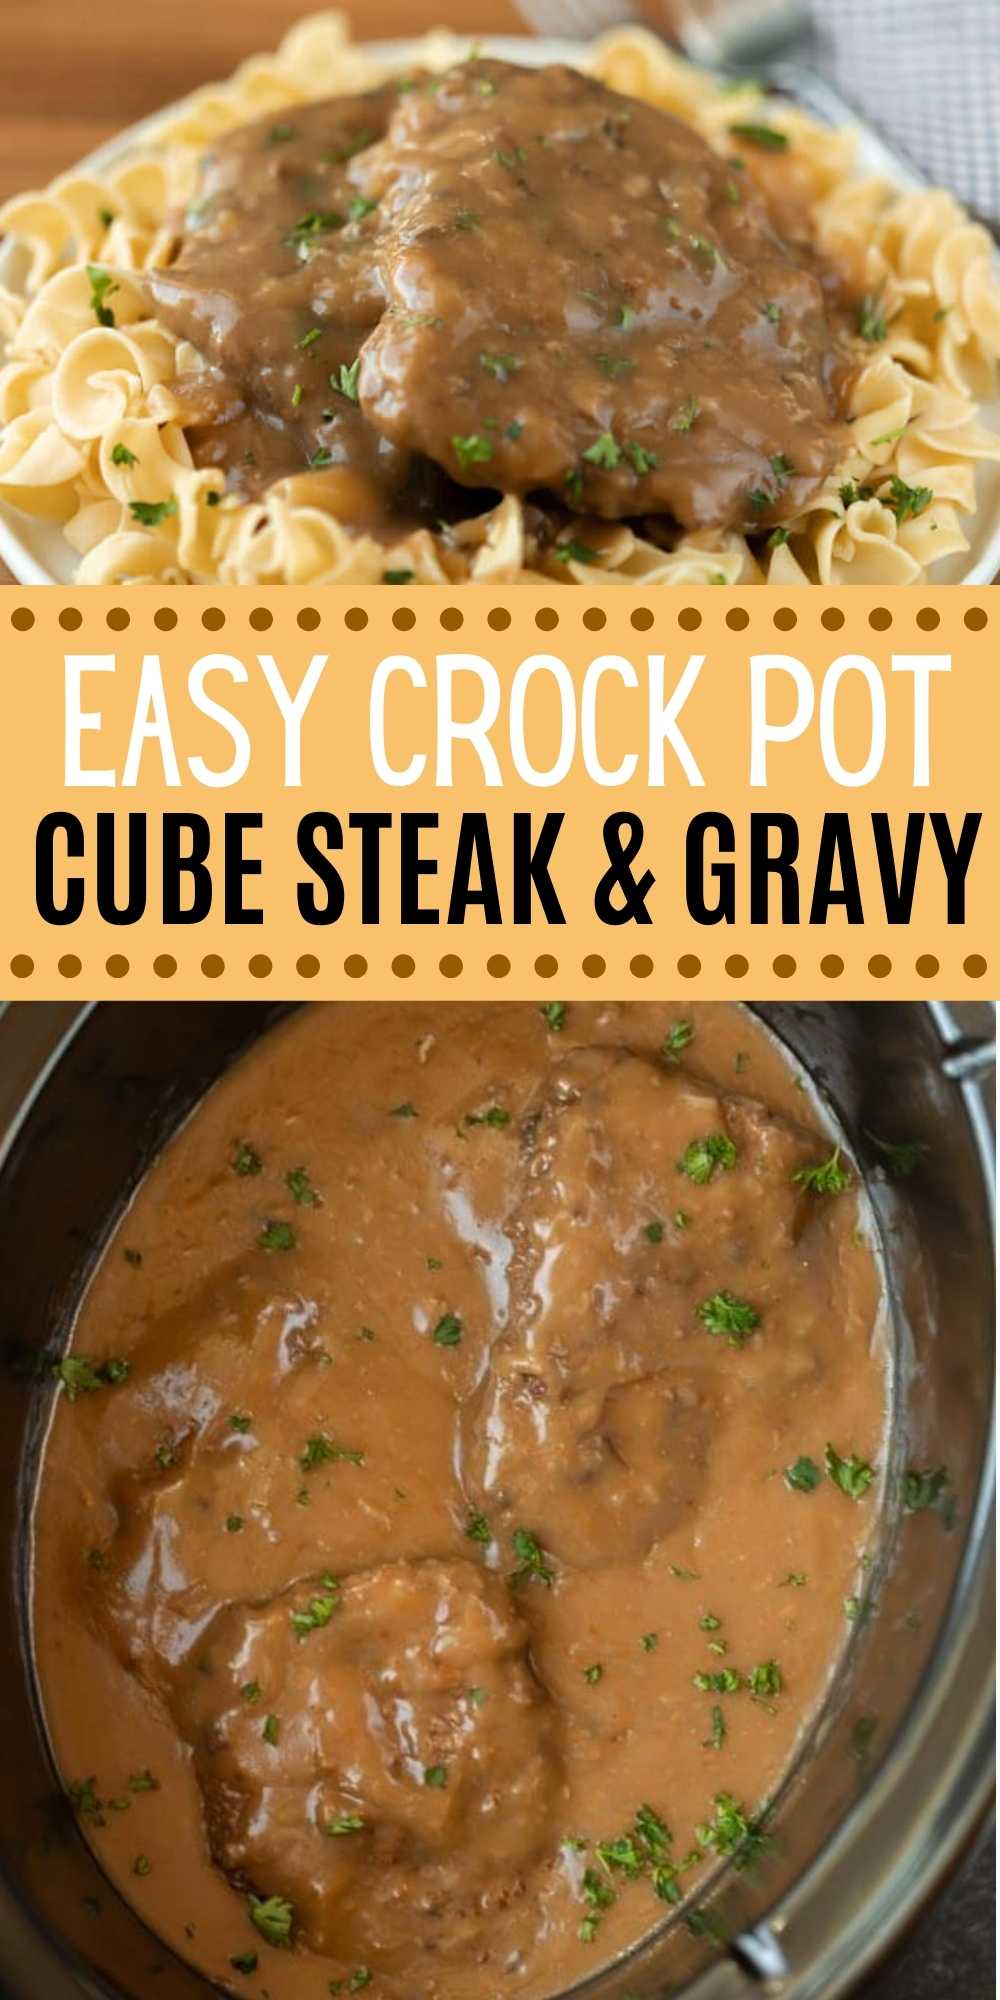 Crock pot Cube Steak and Gravy Recipe – Eating on a Dime